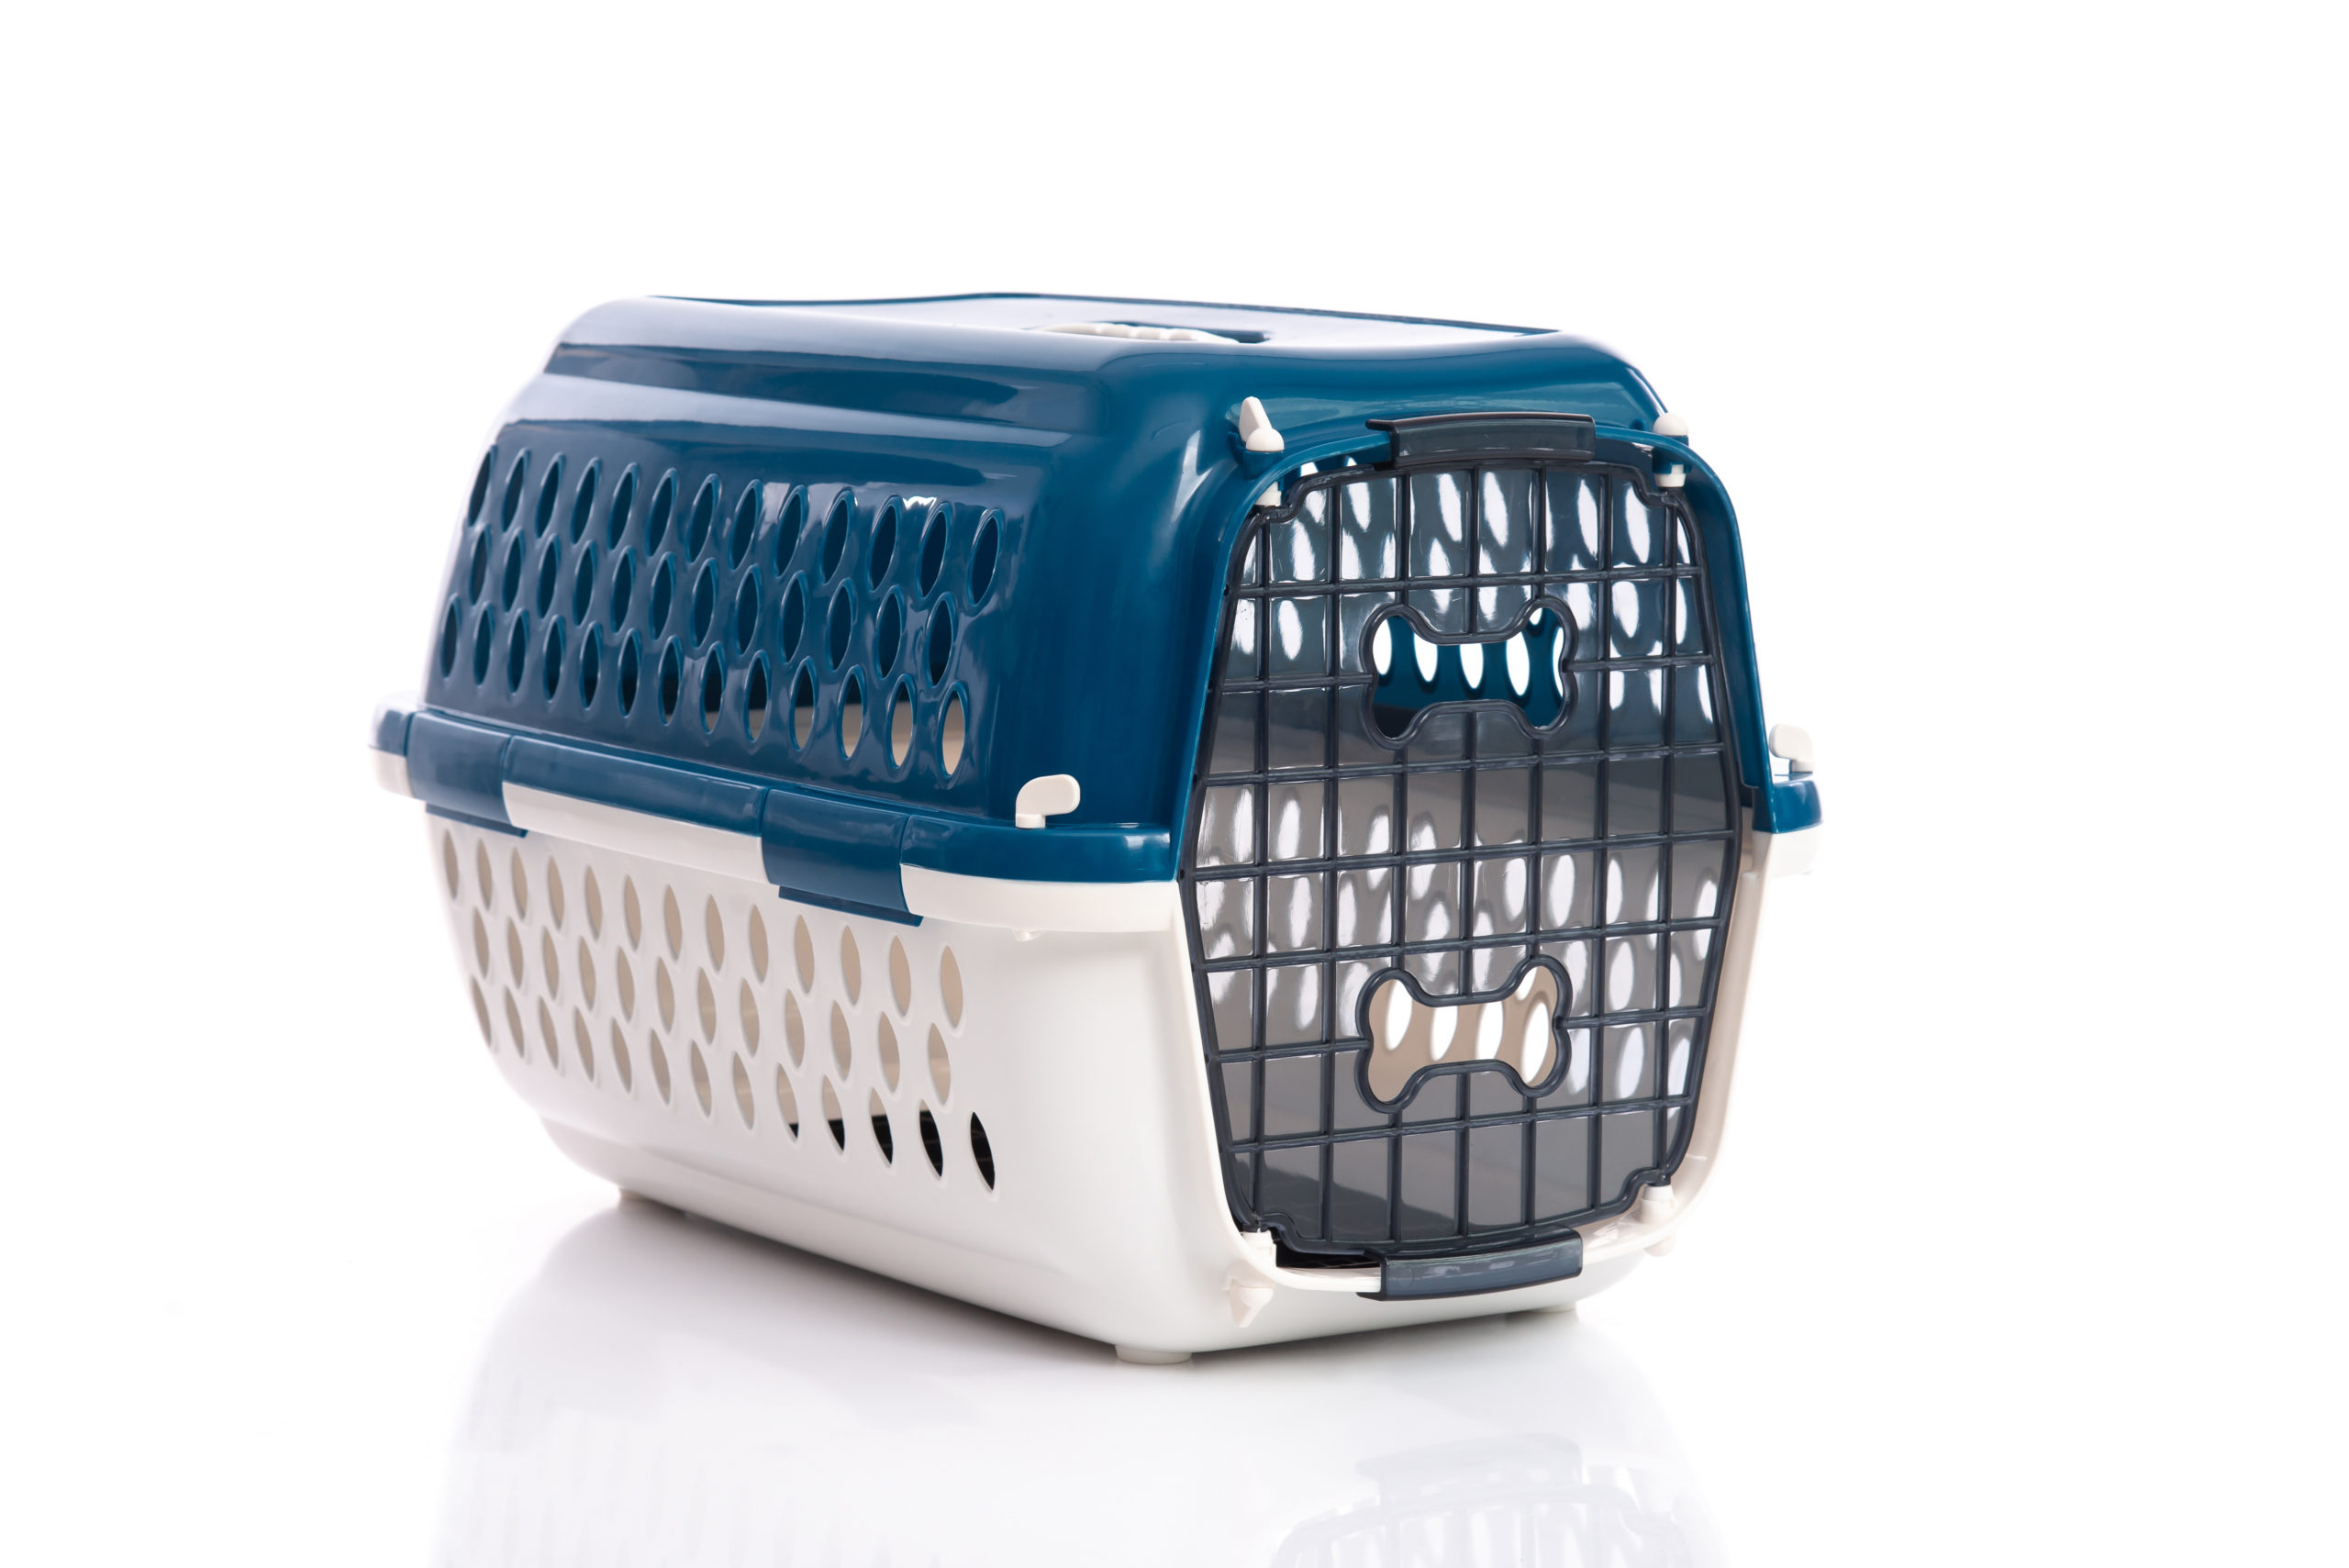 Hard sided pet carrier